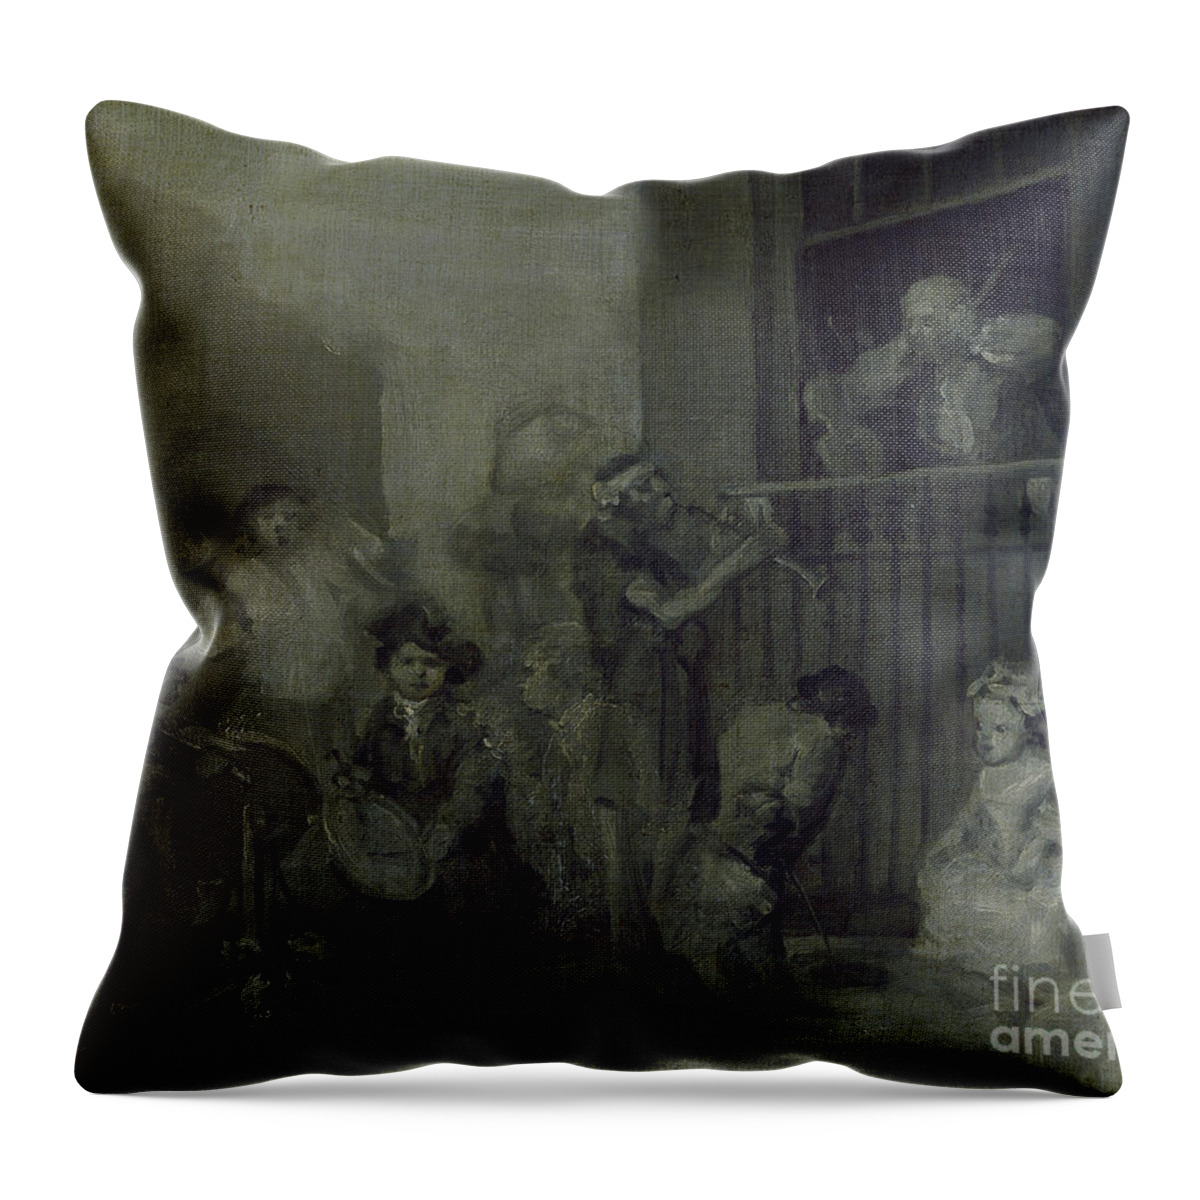 Hogarth Throw Pillow featuring the painting The Enraged Musician, 17th Century by William Hogarth